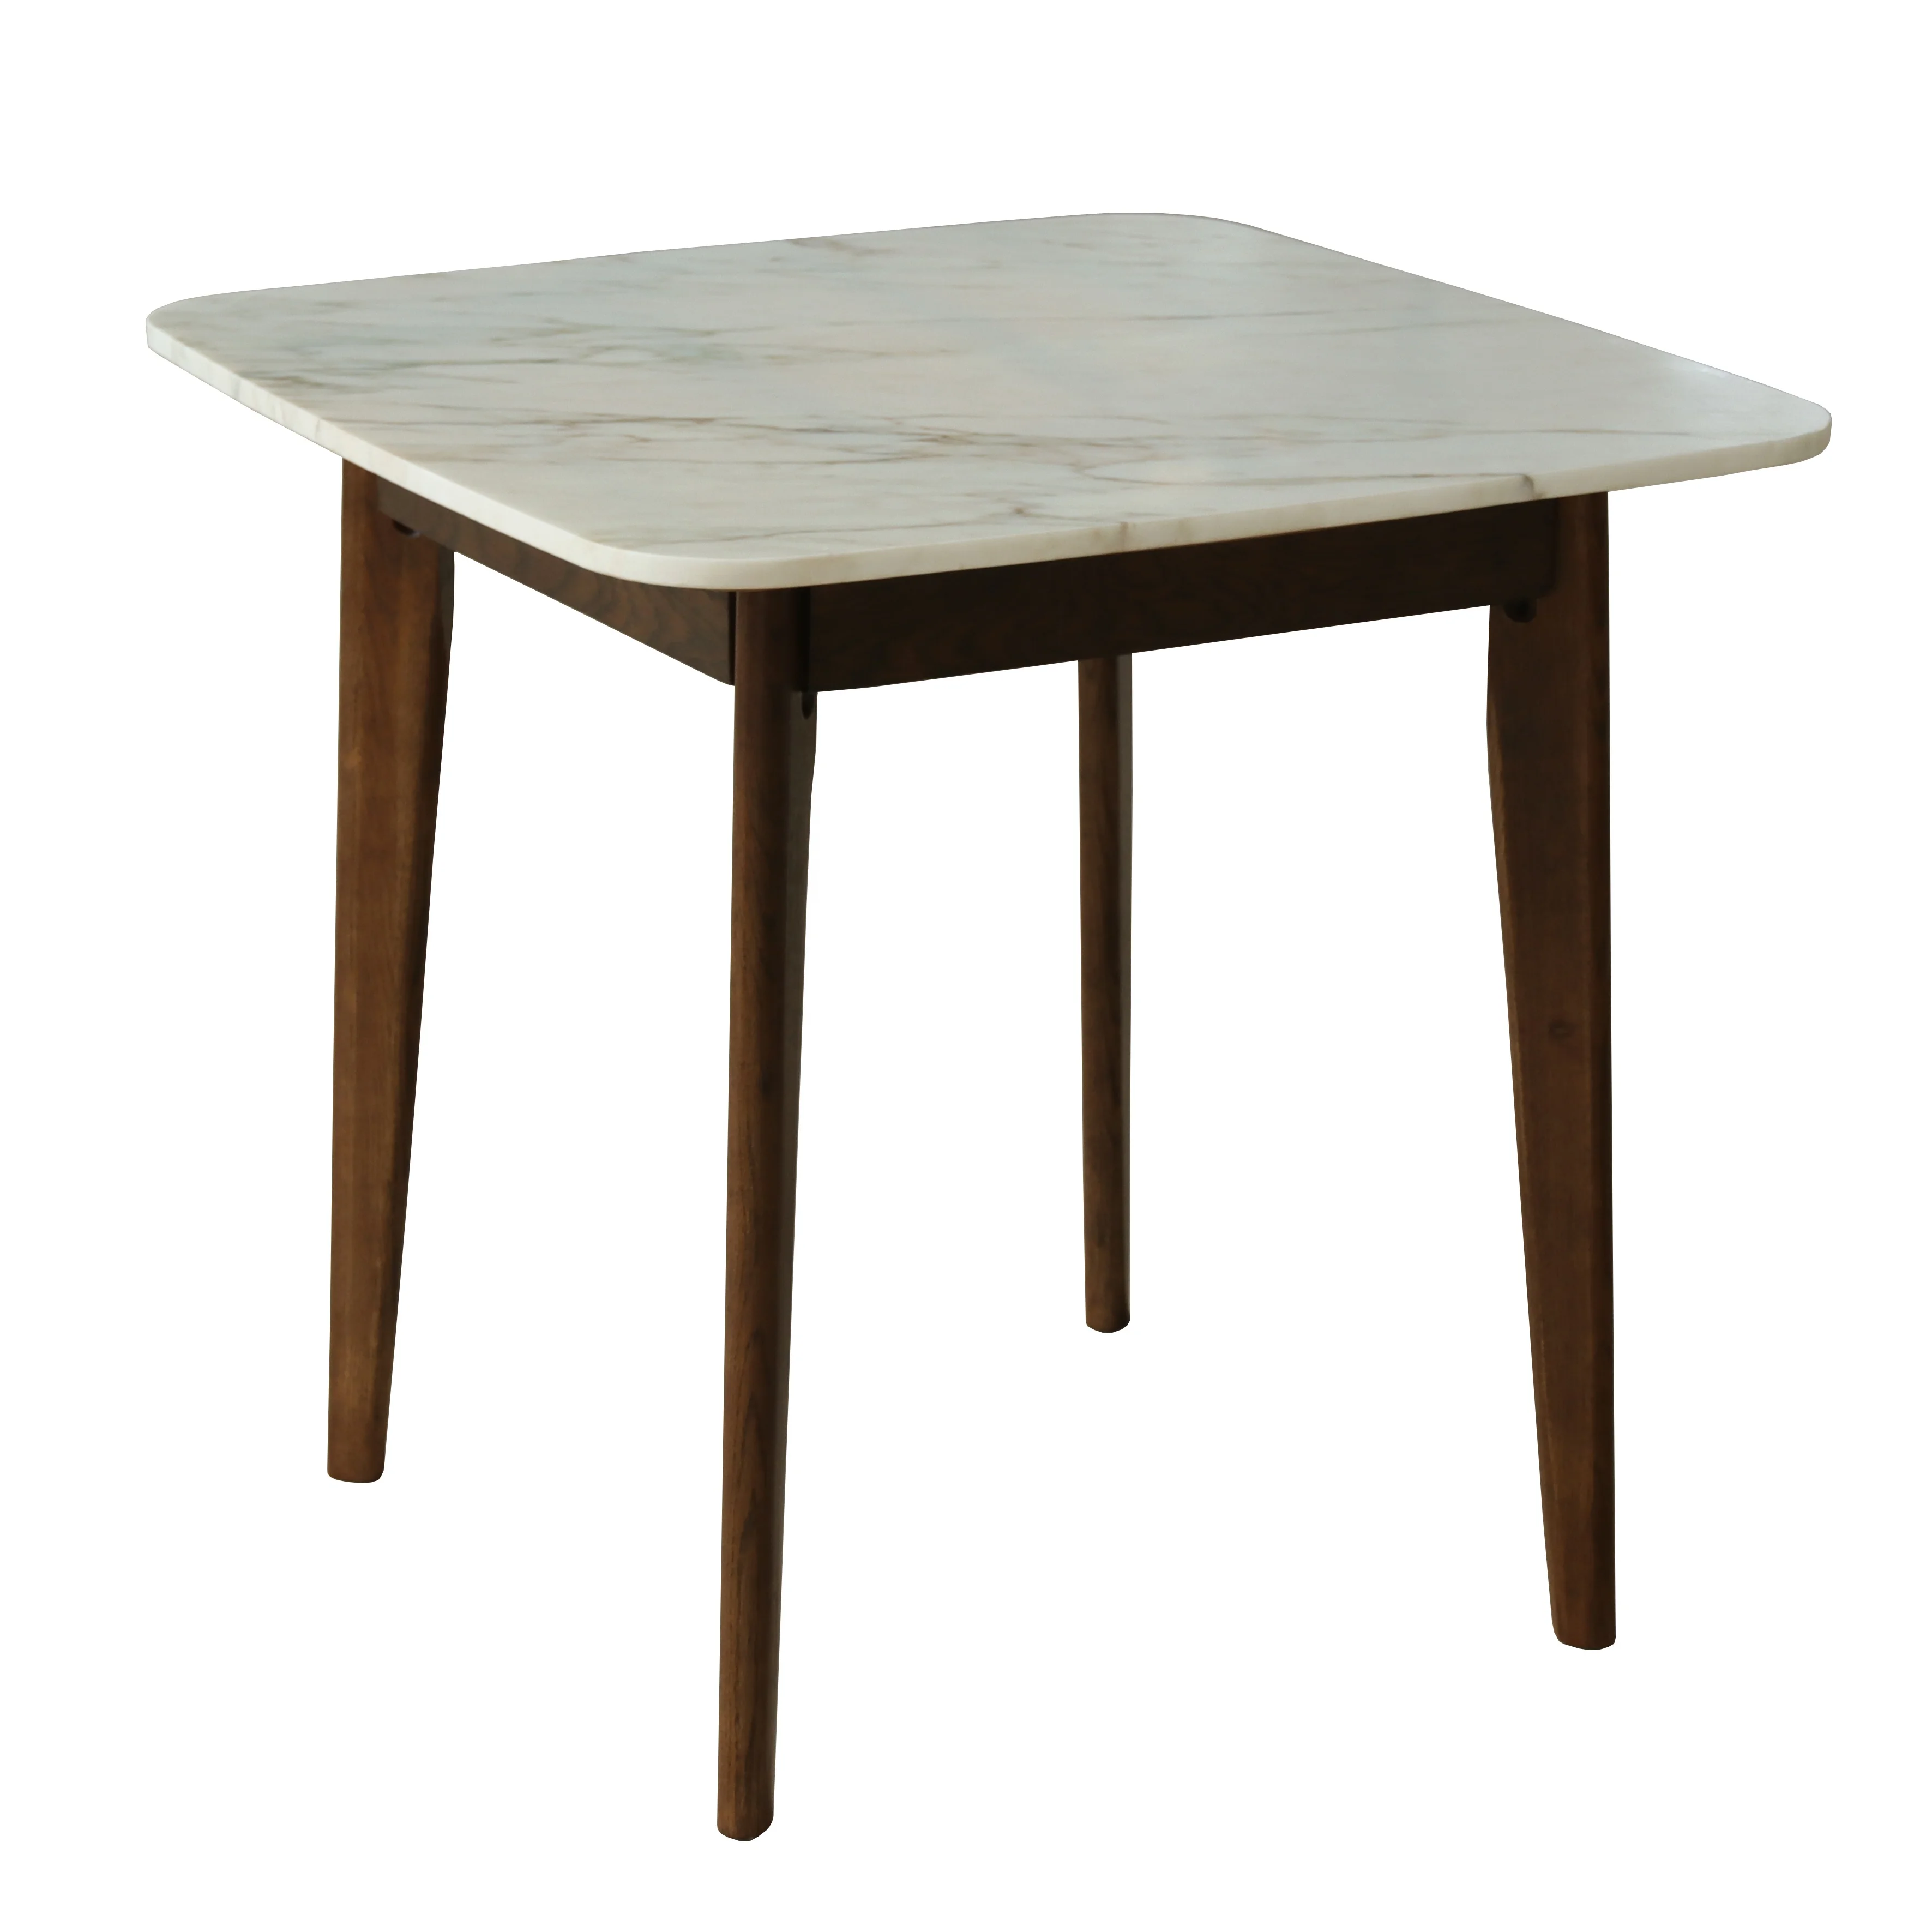 Marble Dining Table Modern Natural Stone Top Oak Leg Table Buy Marble Top Dining Table